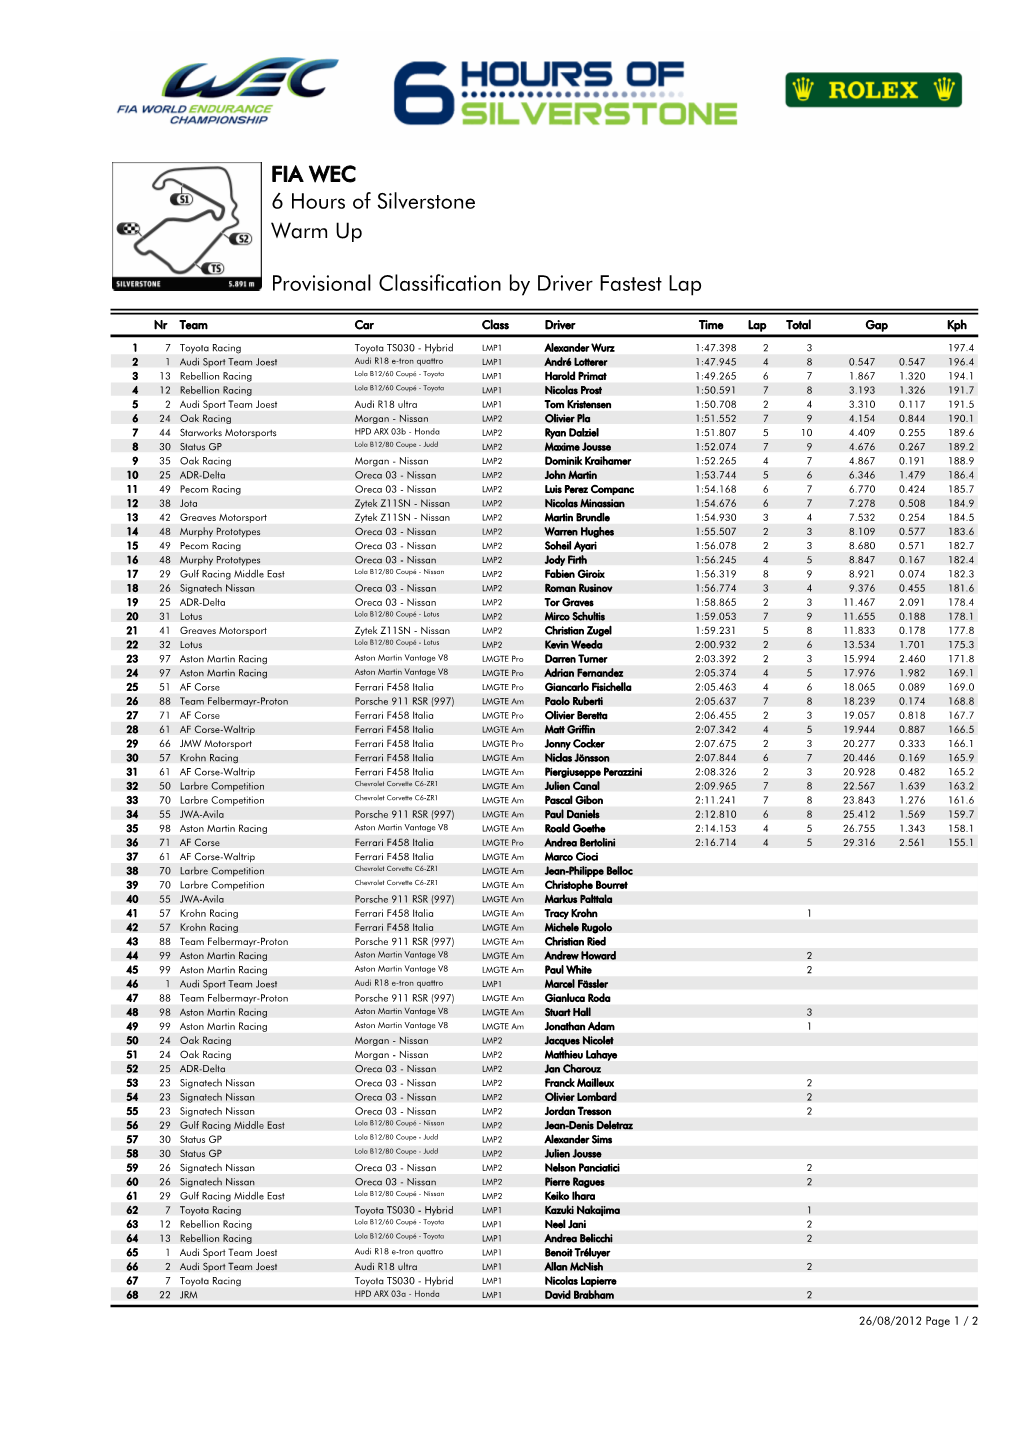 Provisional Classification by Driver Fastest Lap Warm up 6 Hours Of